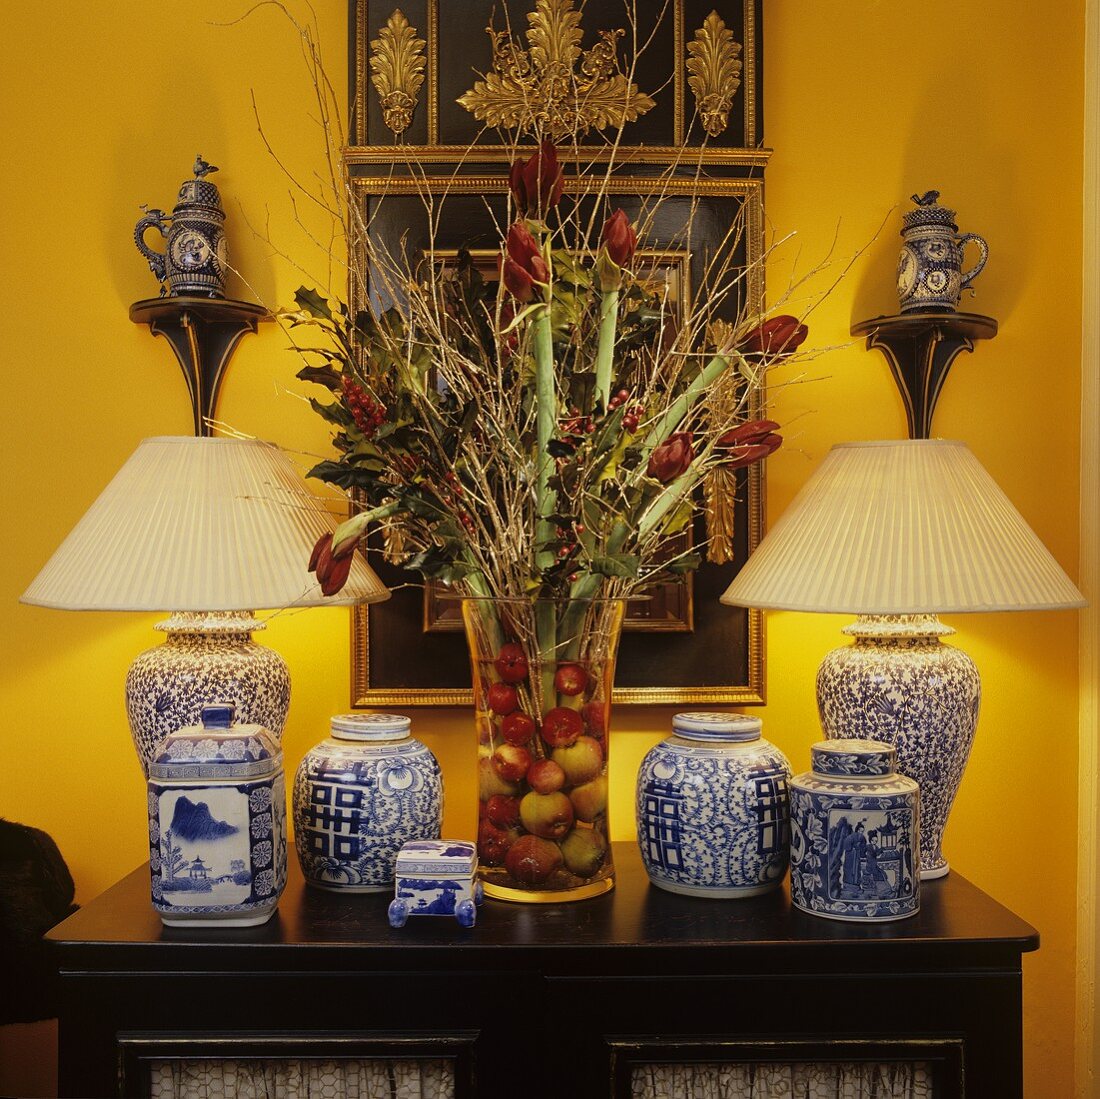 Chinese vases with plissé shades and porcelain on a chest of drawers with a bunch of amaryllis against a bight yellow wall